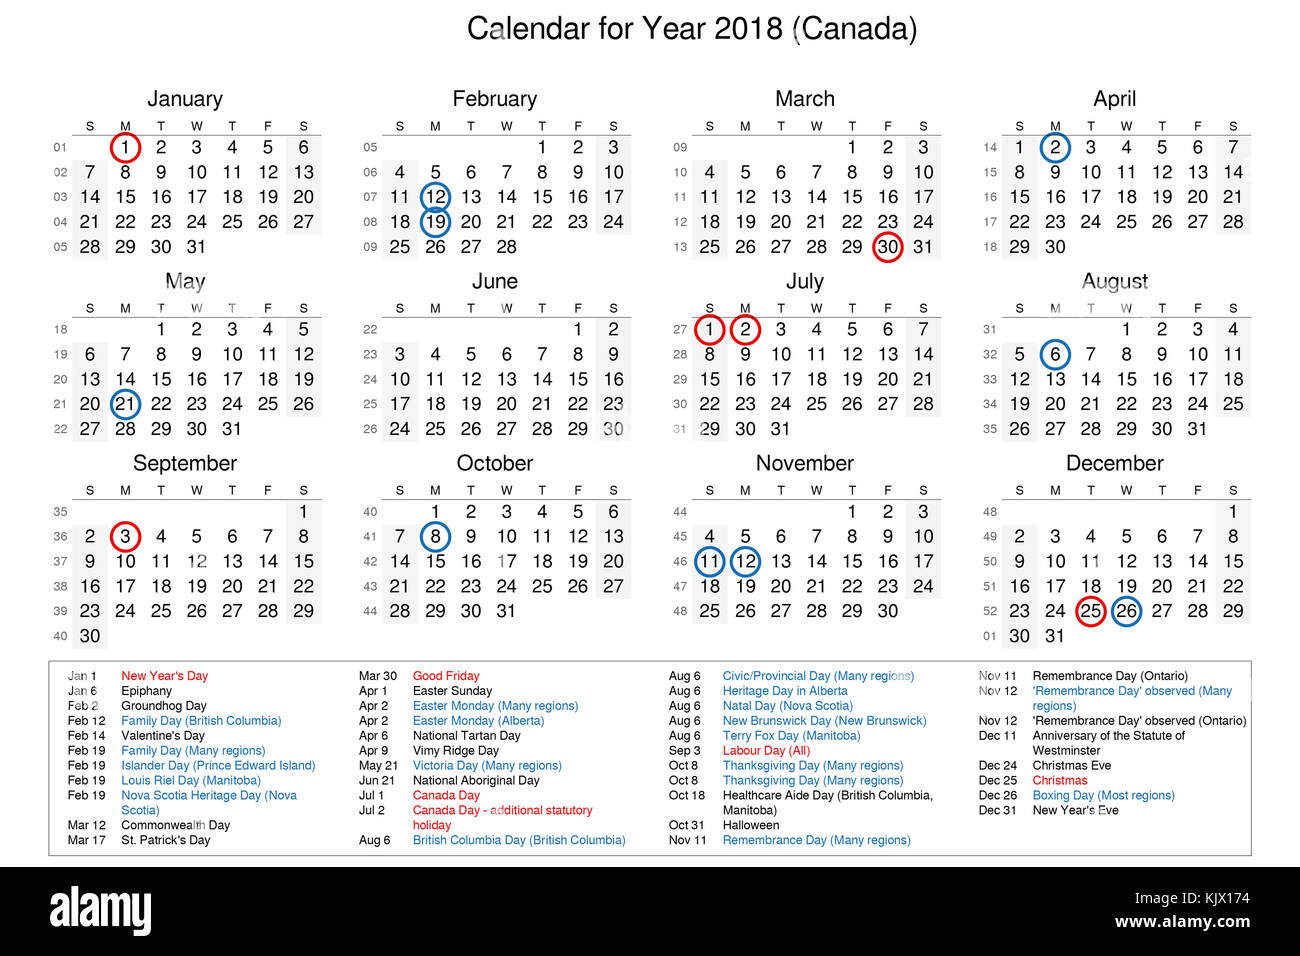 Calendar of year 2018 with public holidays and bank holidays for Canada Stock Photo